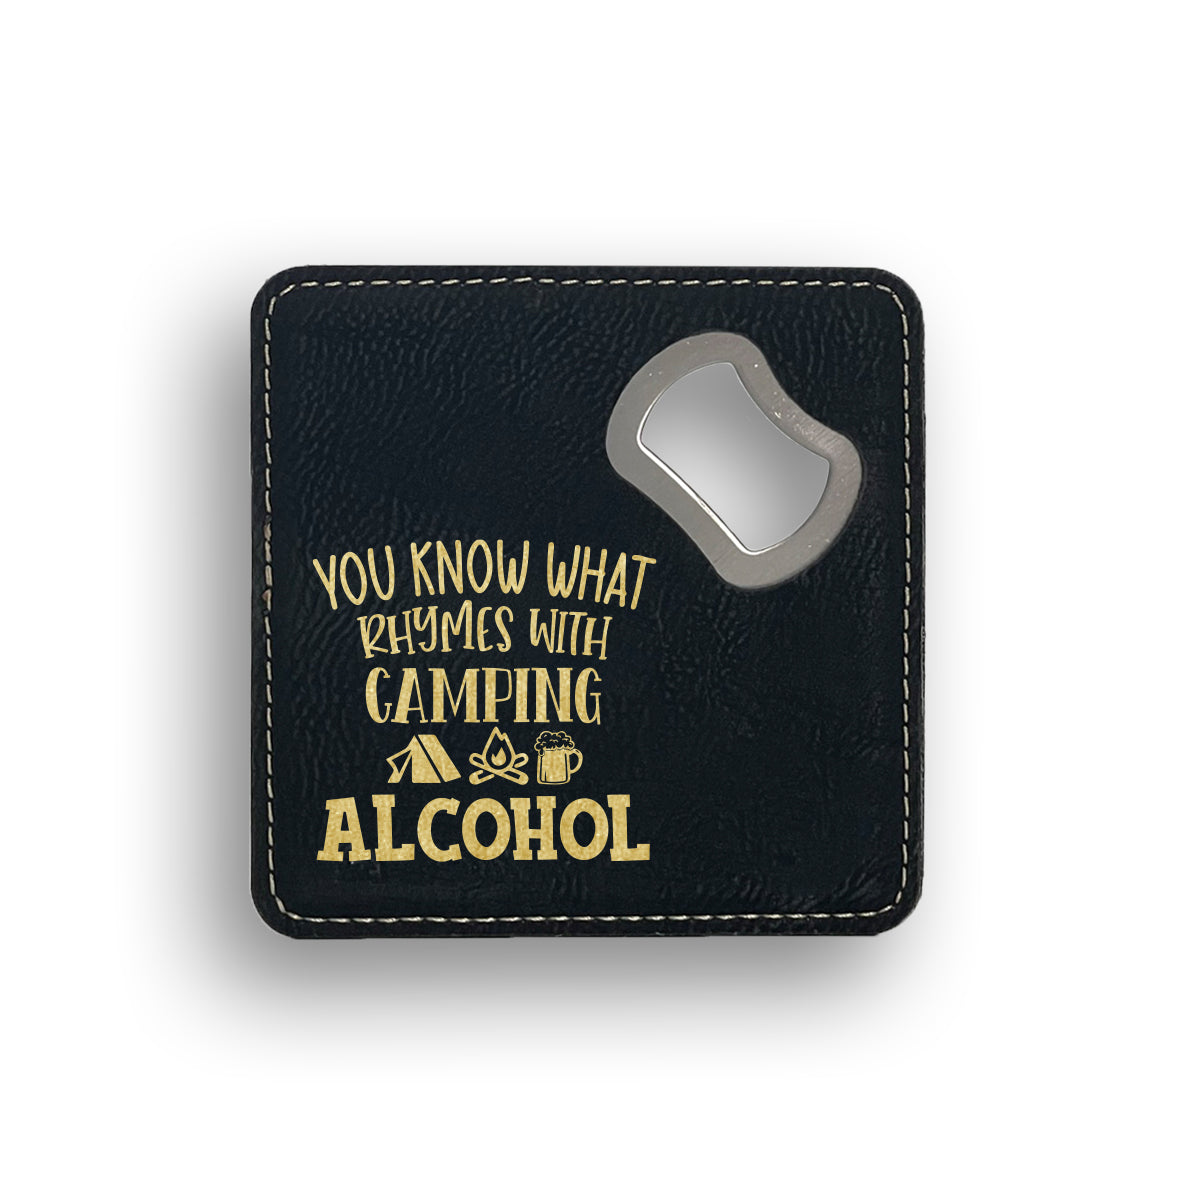 Rhymes With Camping Bottle Opener Coaster